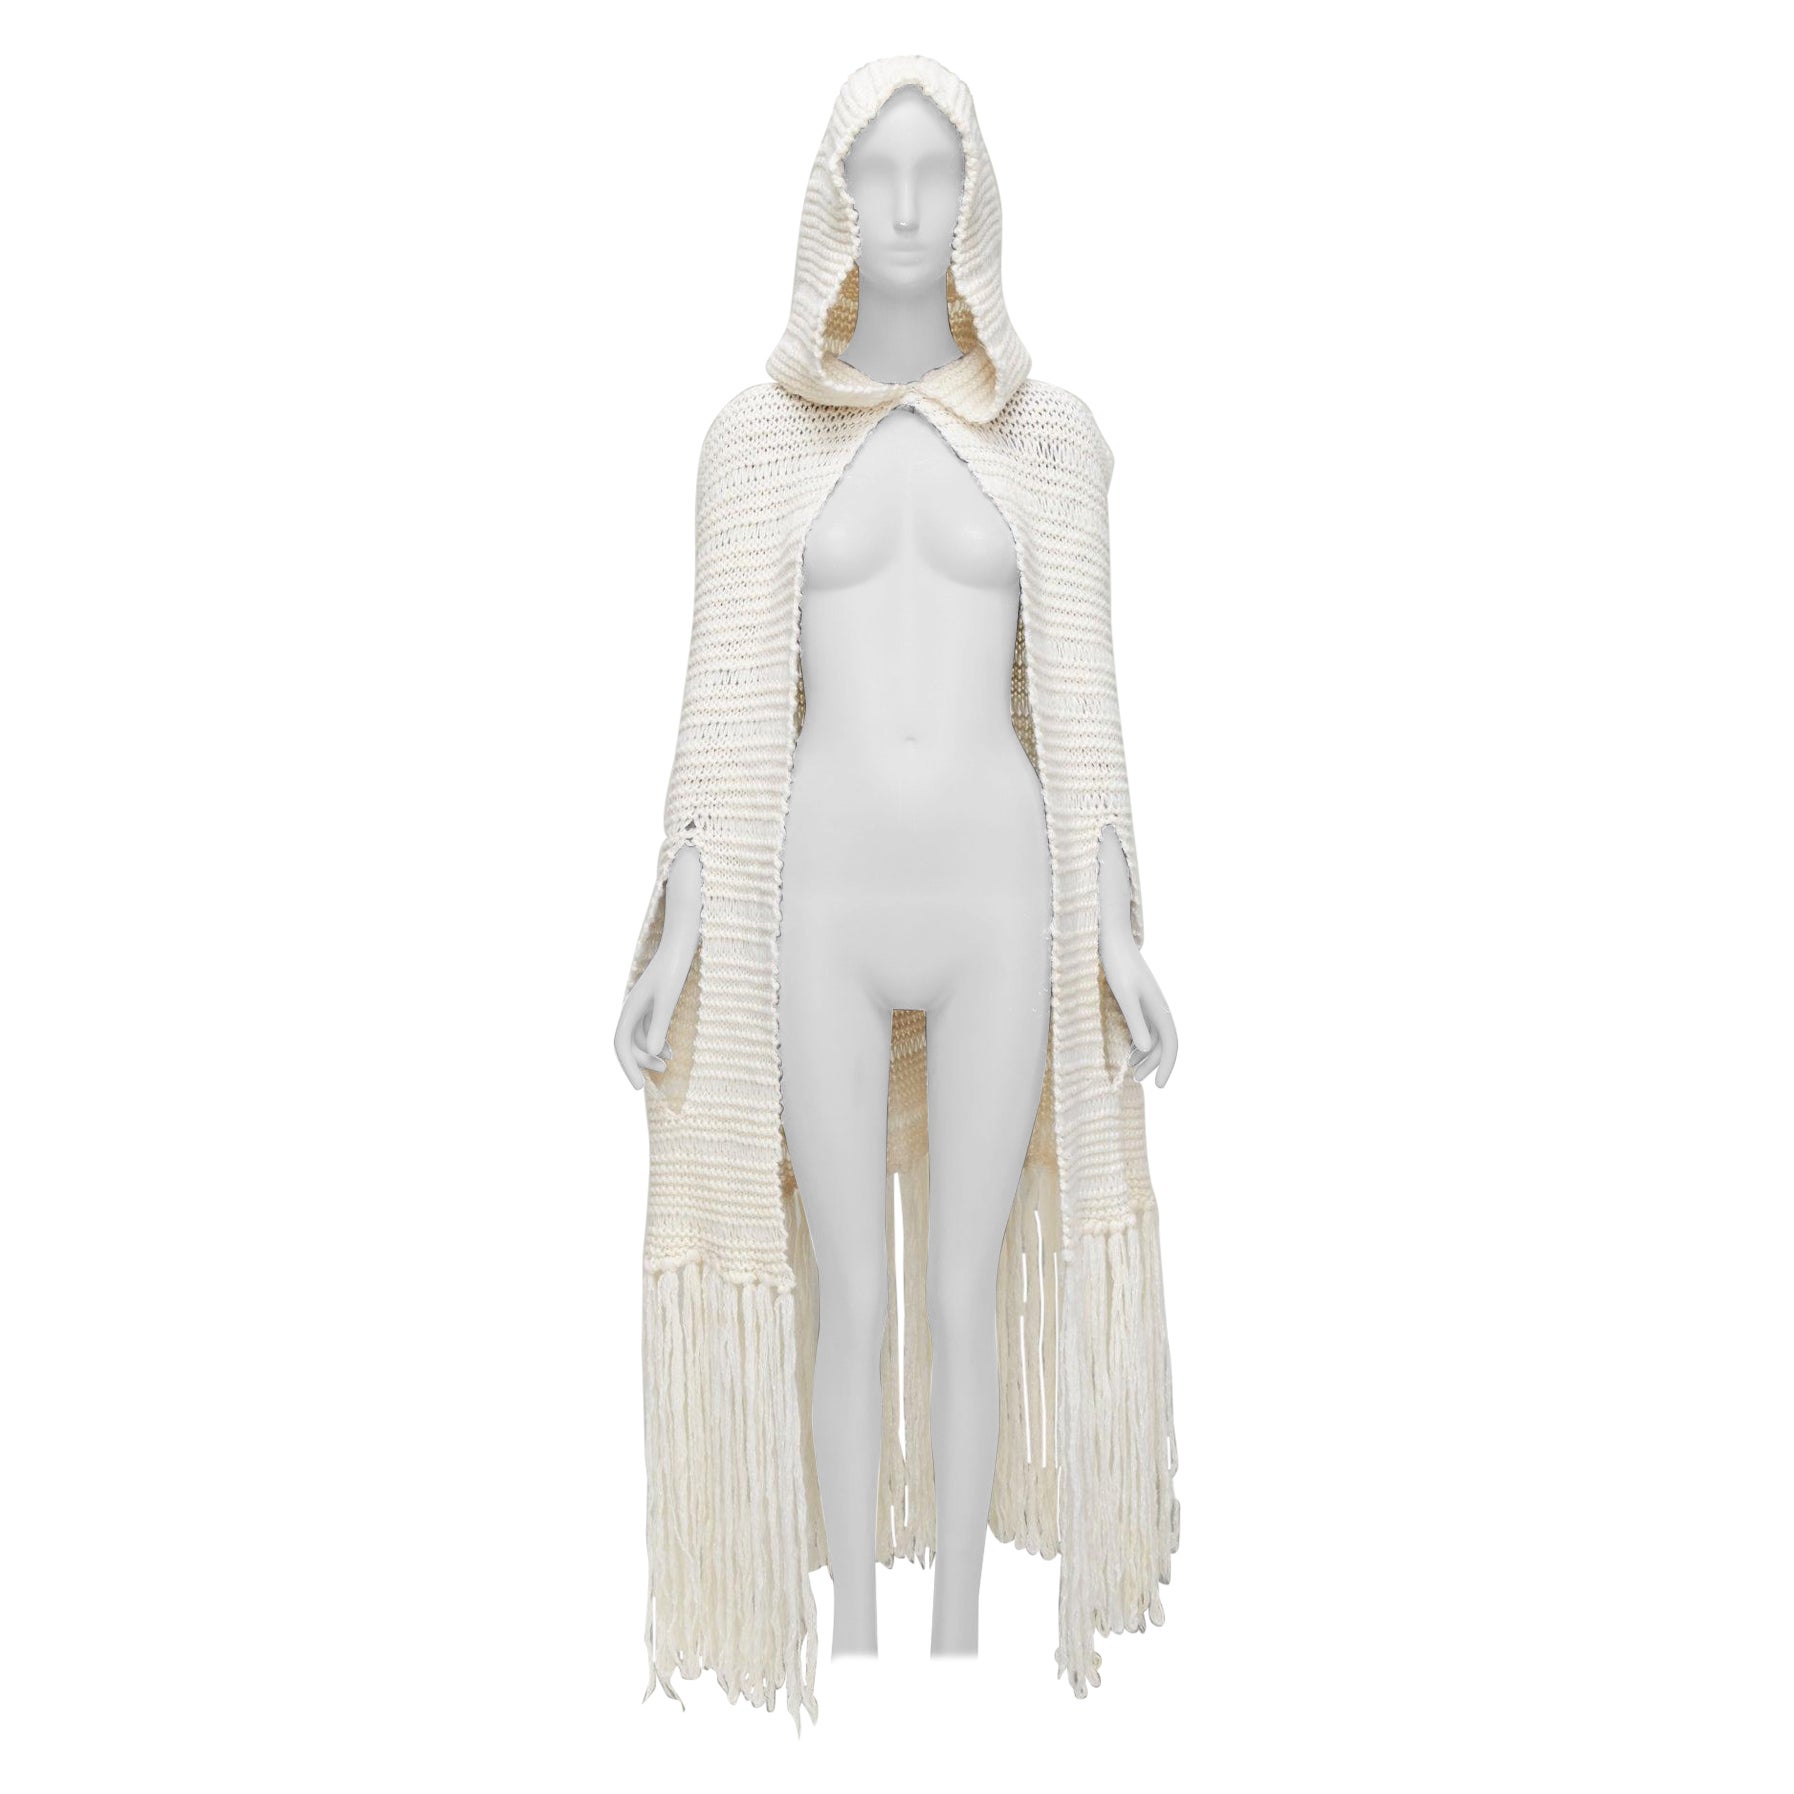 DIOR HOMME Hedi Slimane 2005 cream wool mohair tassel knit hooded cape For Sale